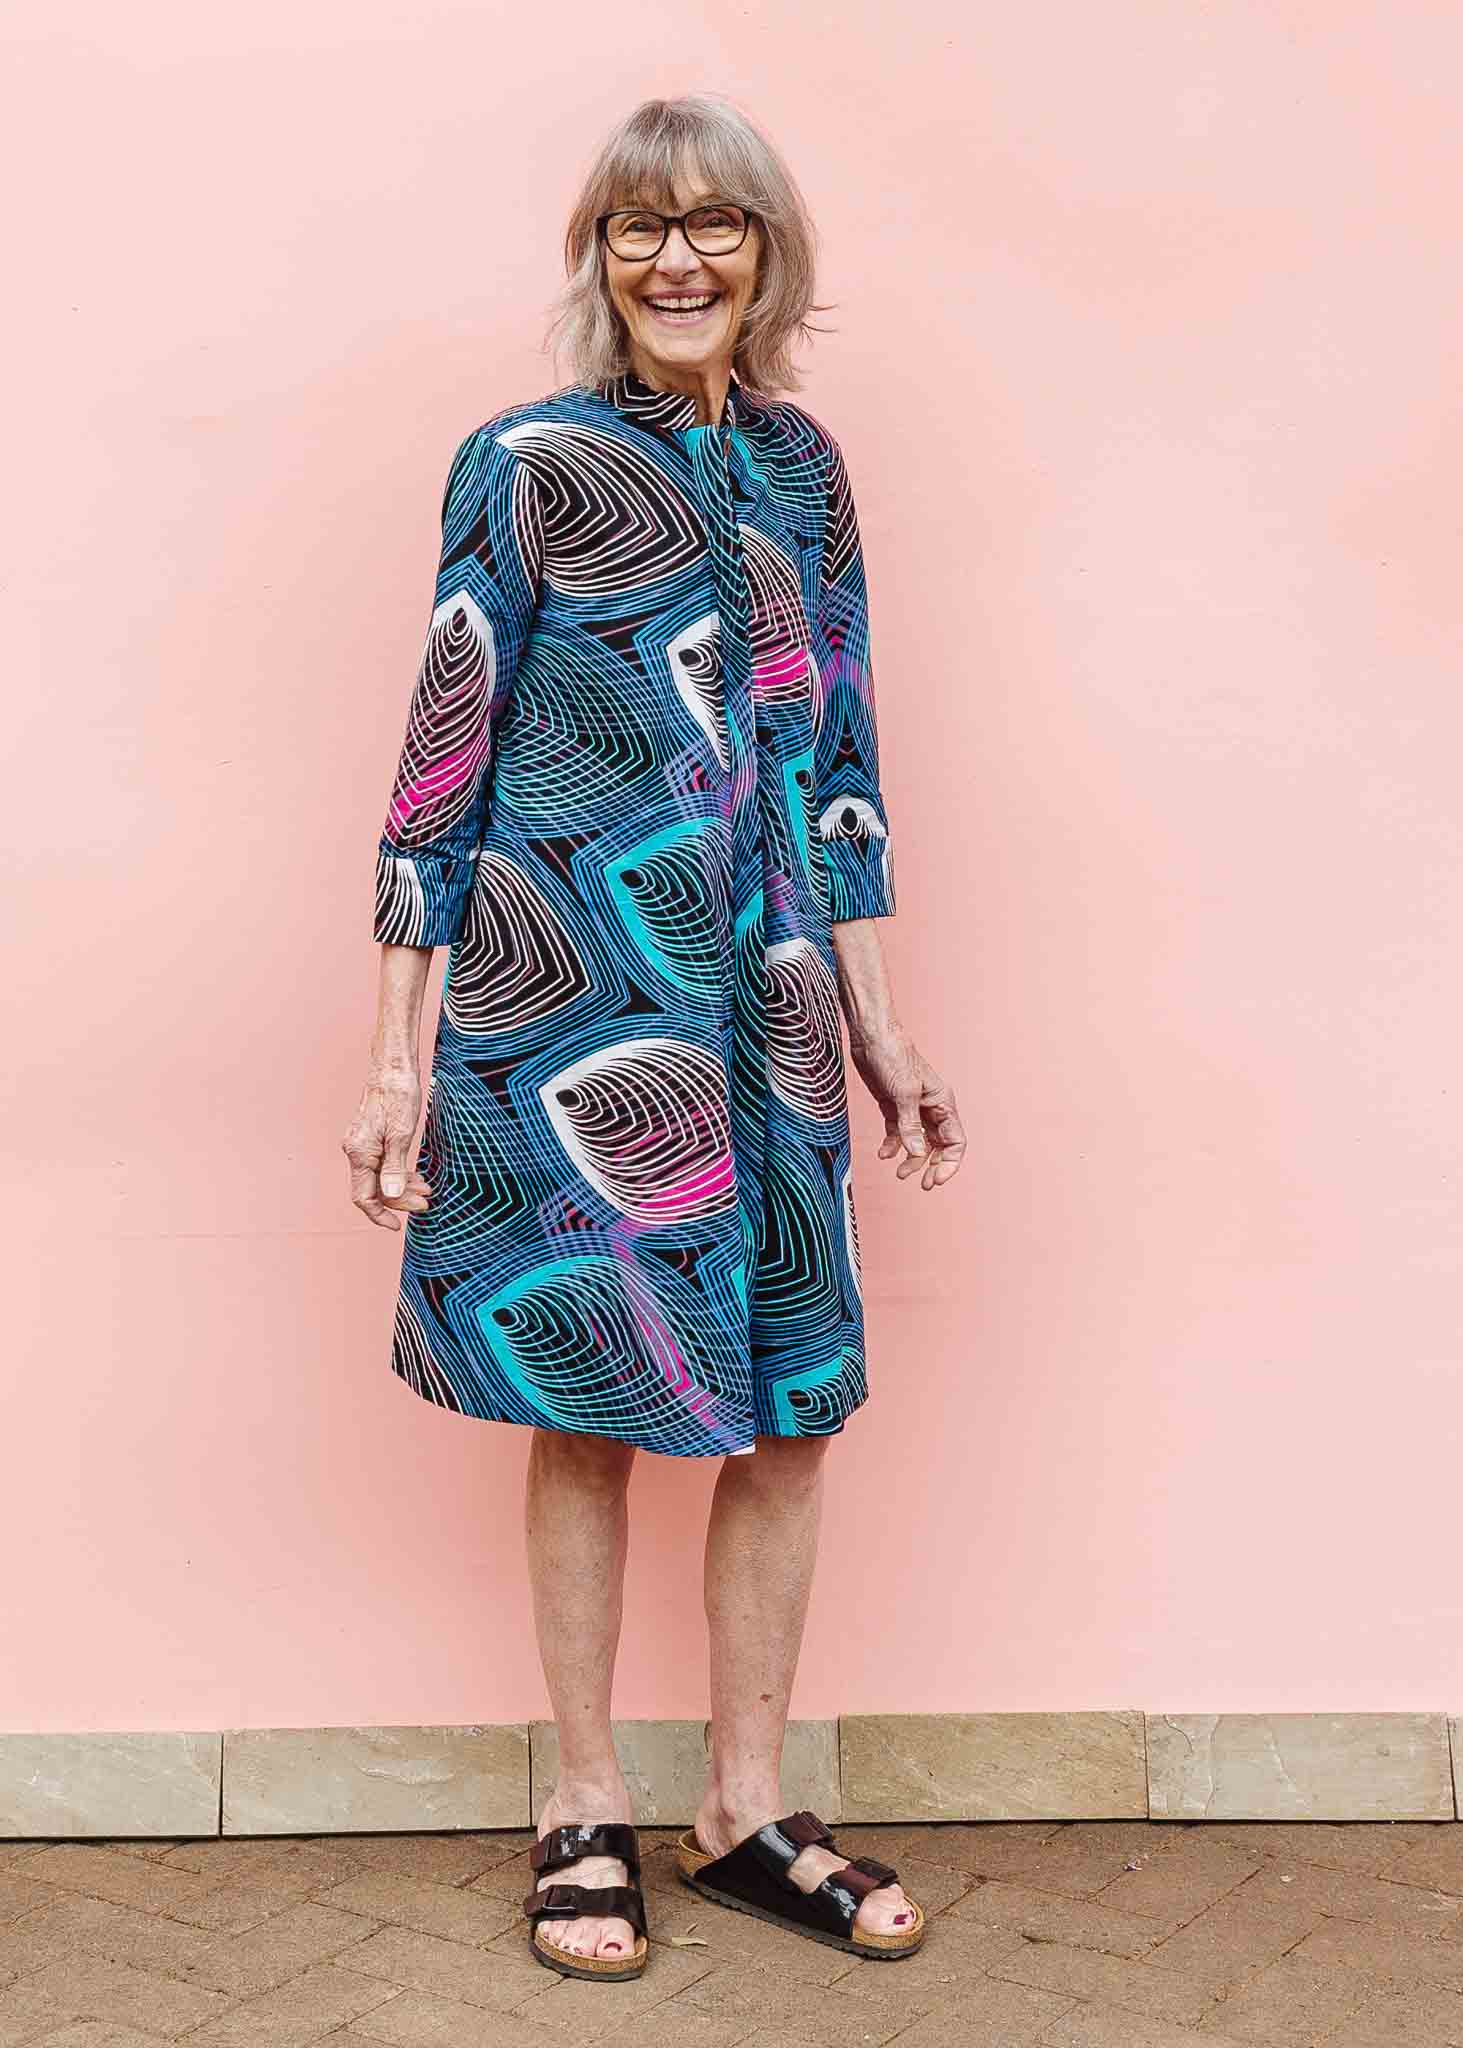 Model wearing black dress with colorful peacock print.